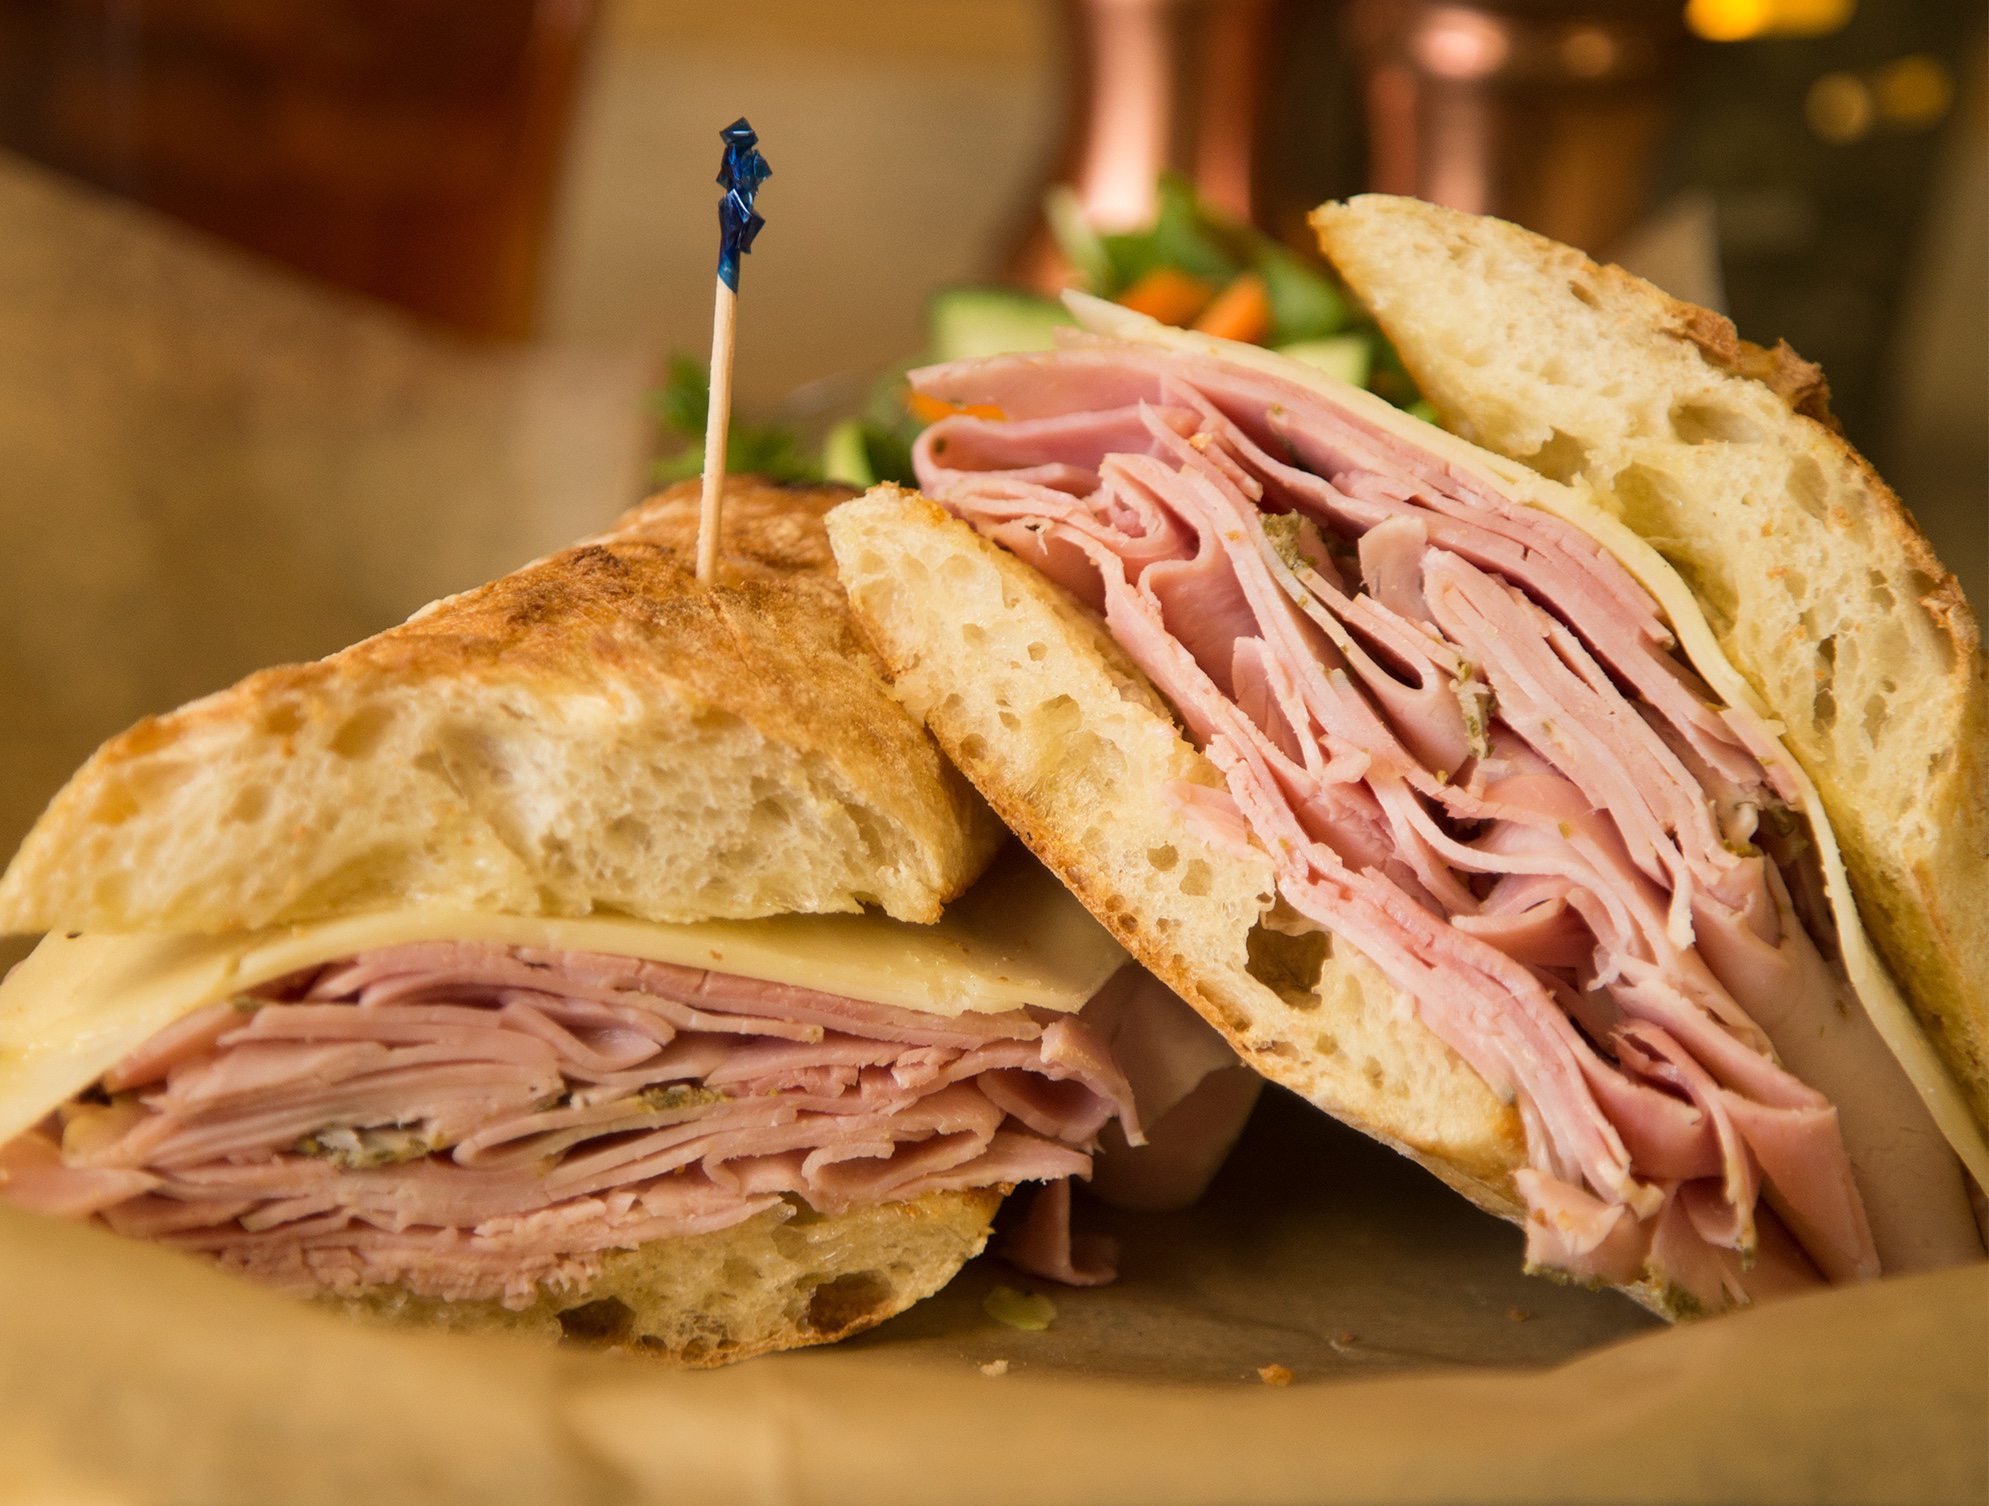 The Parisian (Ron Style) sandwich from Derby Deli at Brown Derby International Wine Center